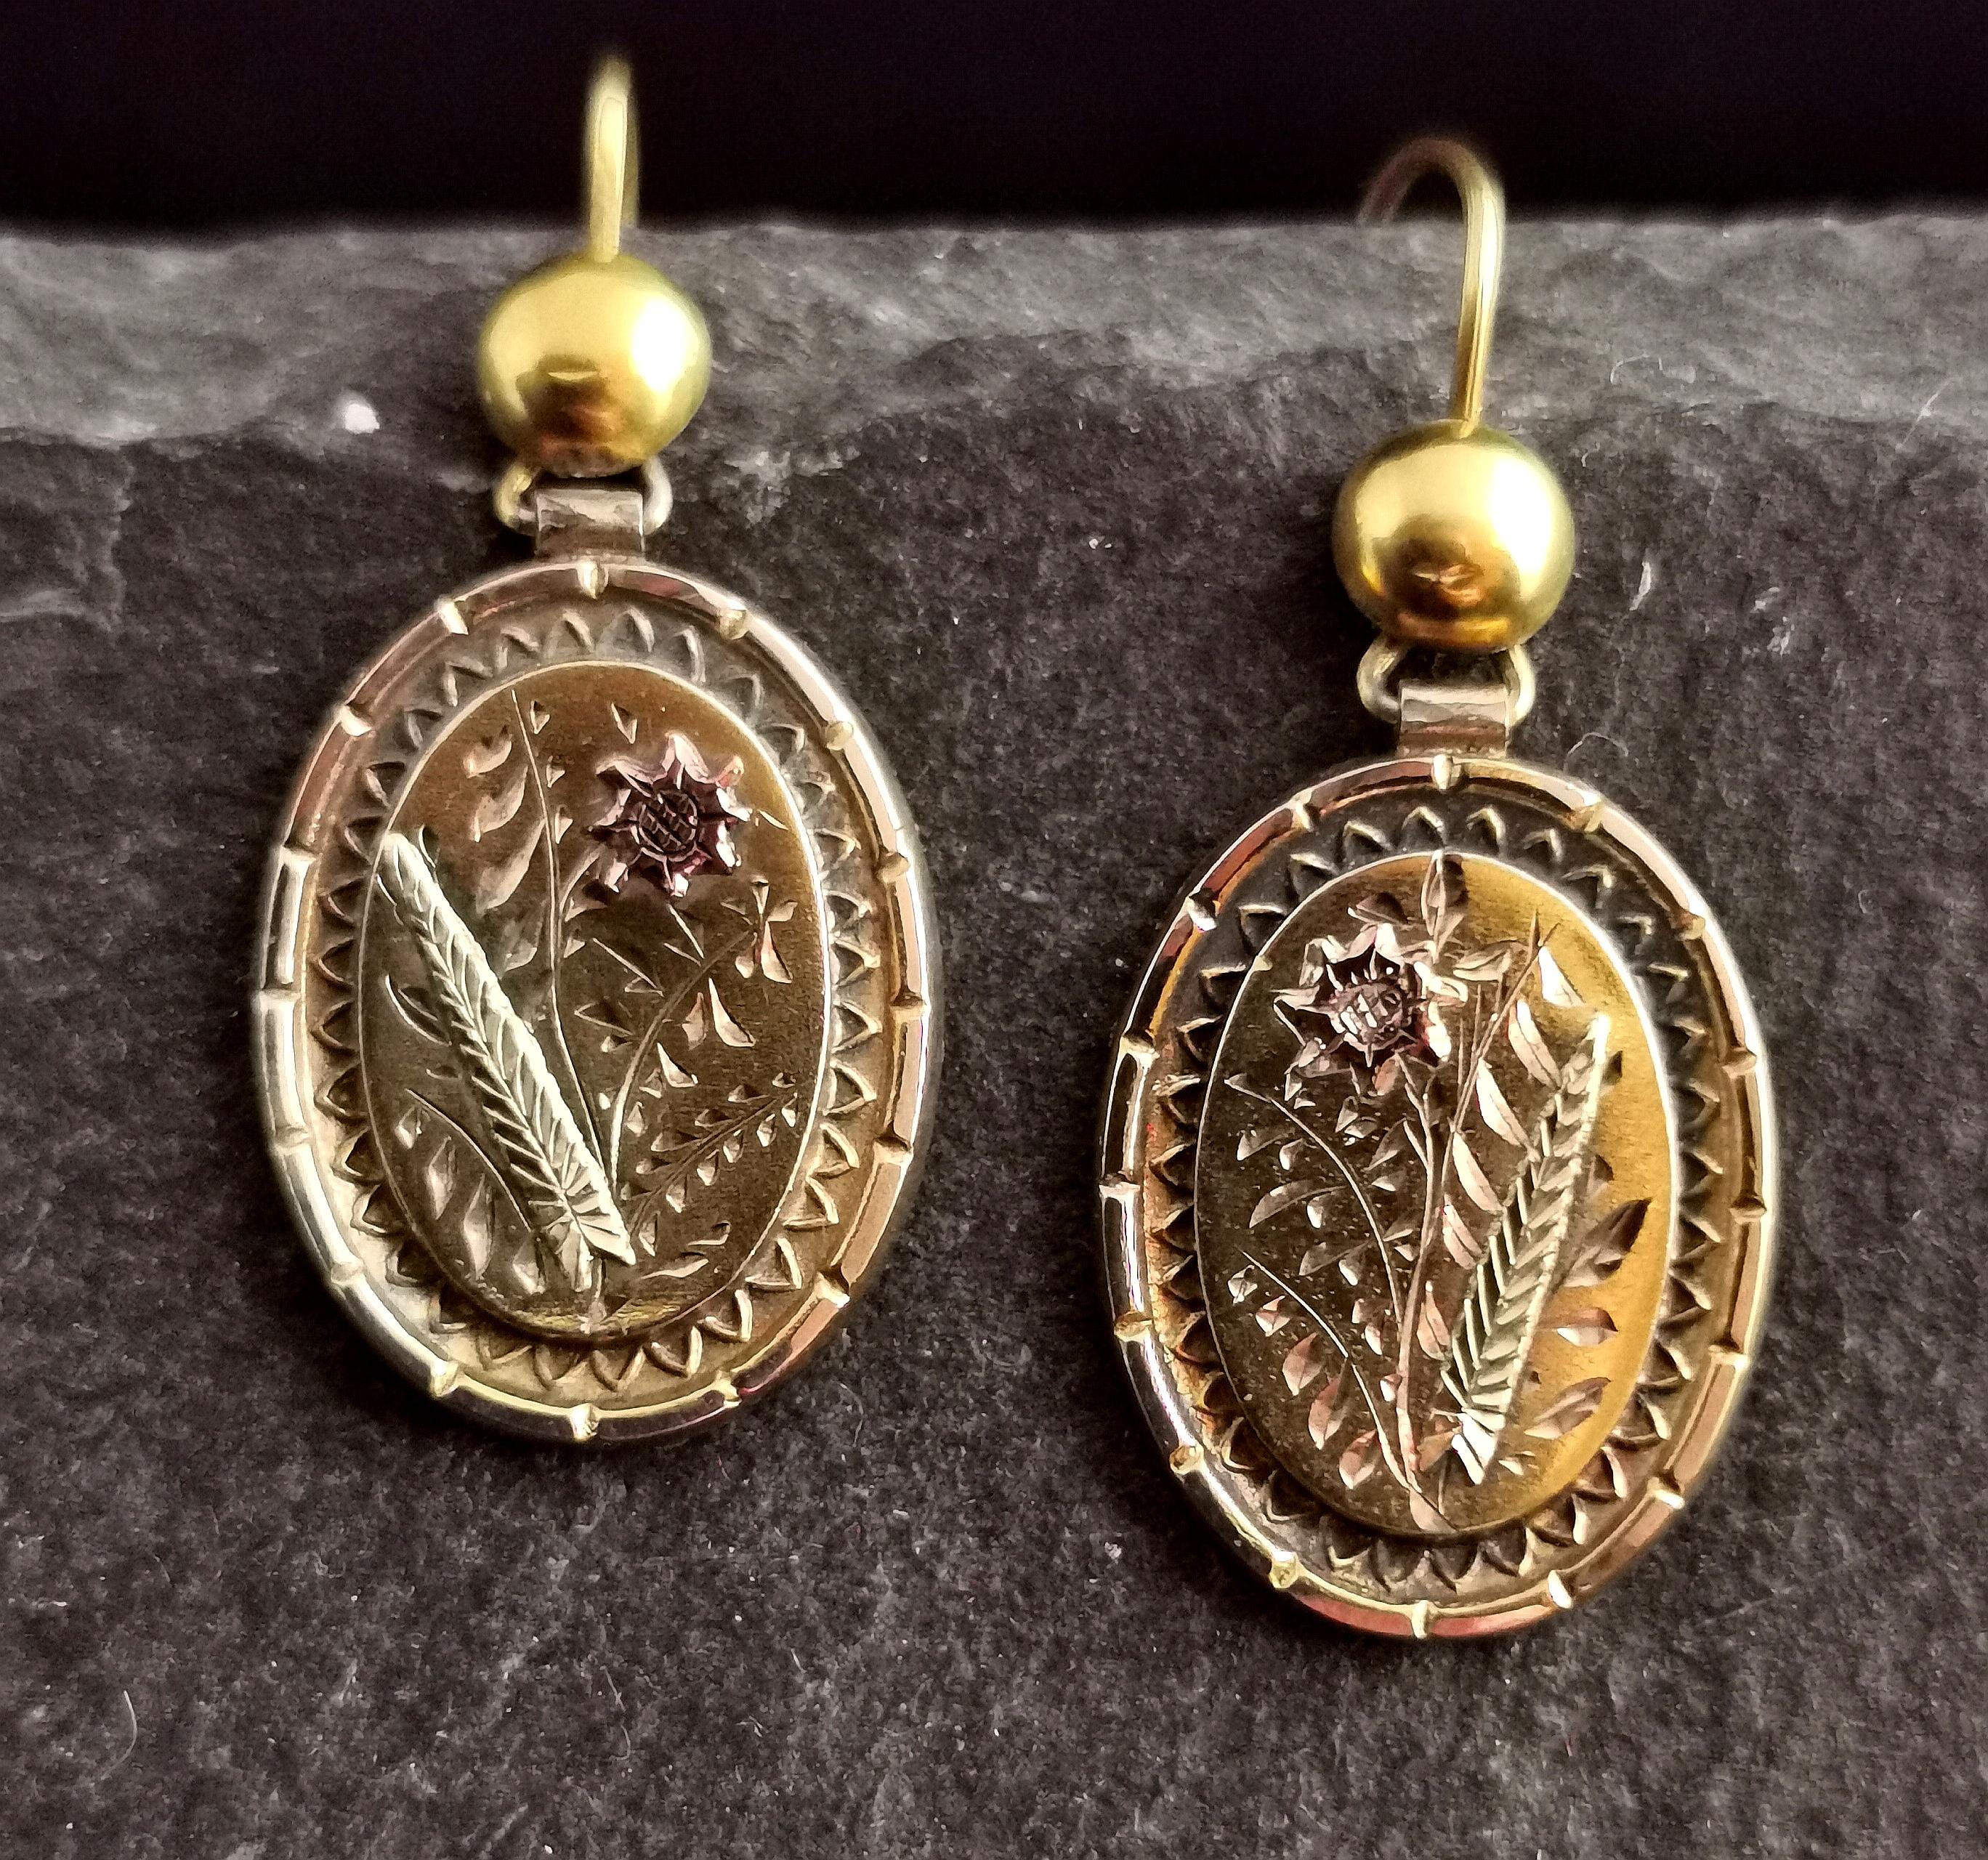 A beautiful pair of Antique 10ct yellow gold door knocker earrings.

Beautiful oval shaped drops with a floral engraving in the aesthetic manner with a tiny applied rose gold flower.

They are hinged door knocker type earrings with an ear wire